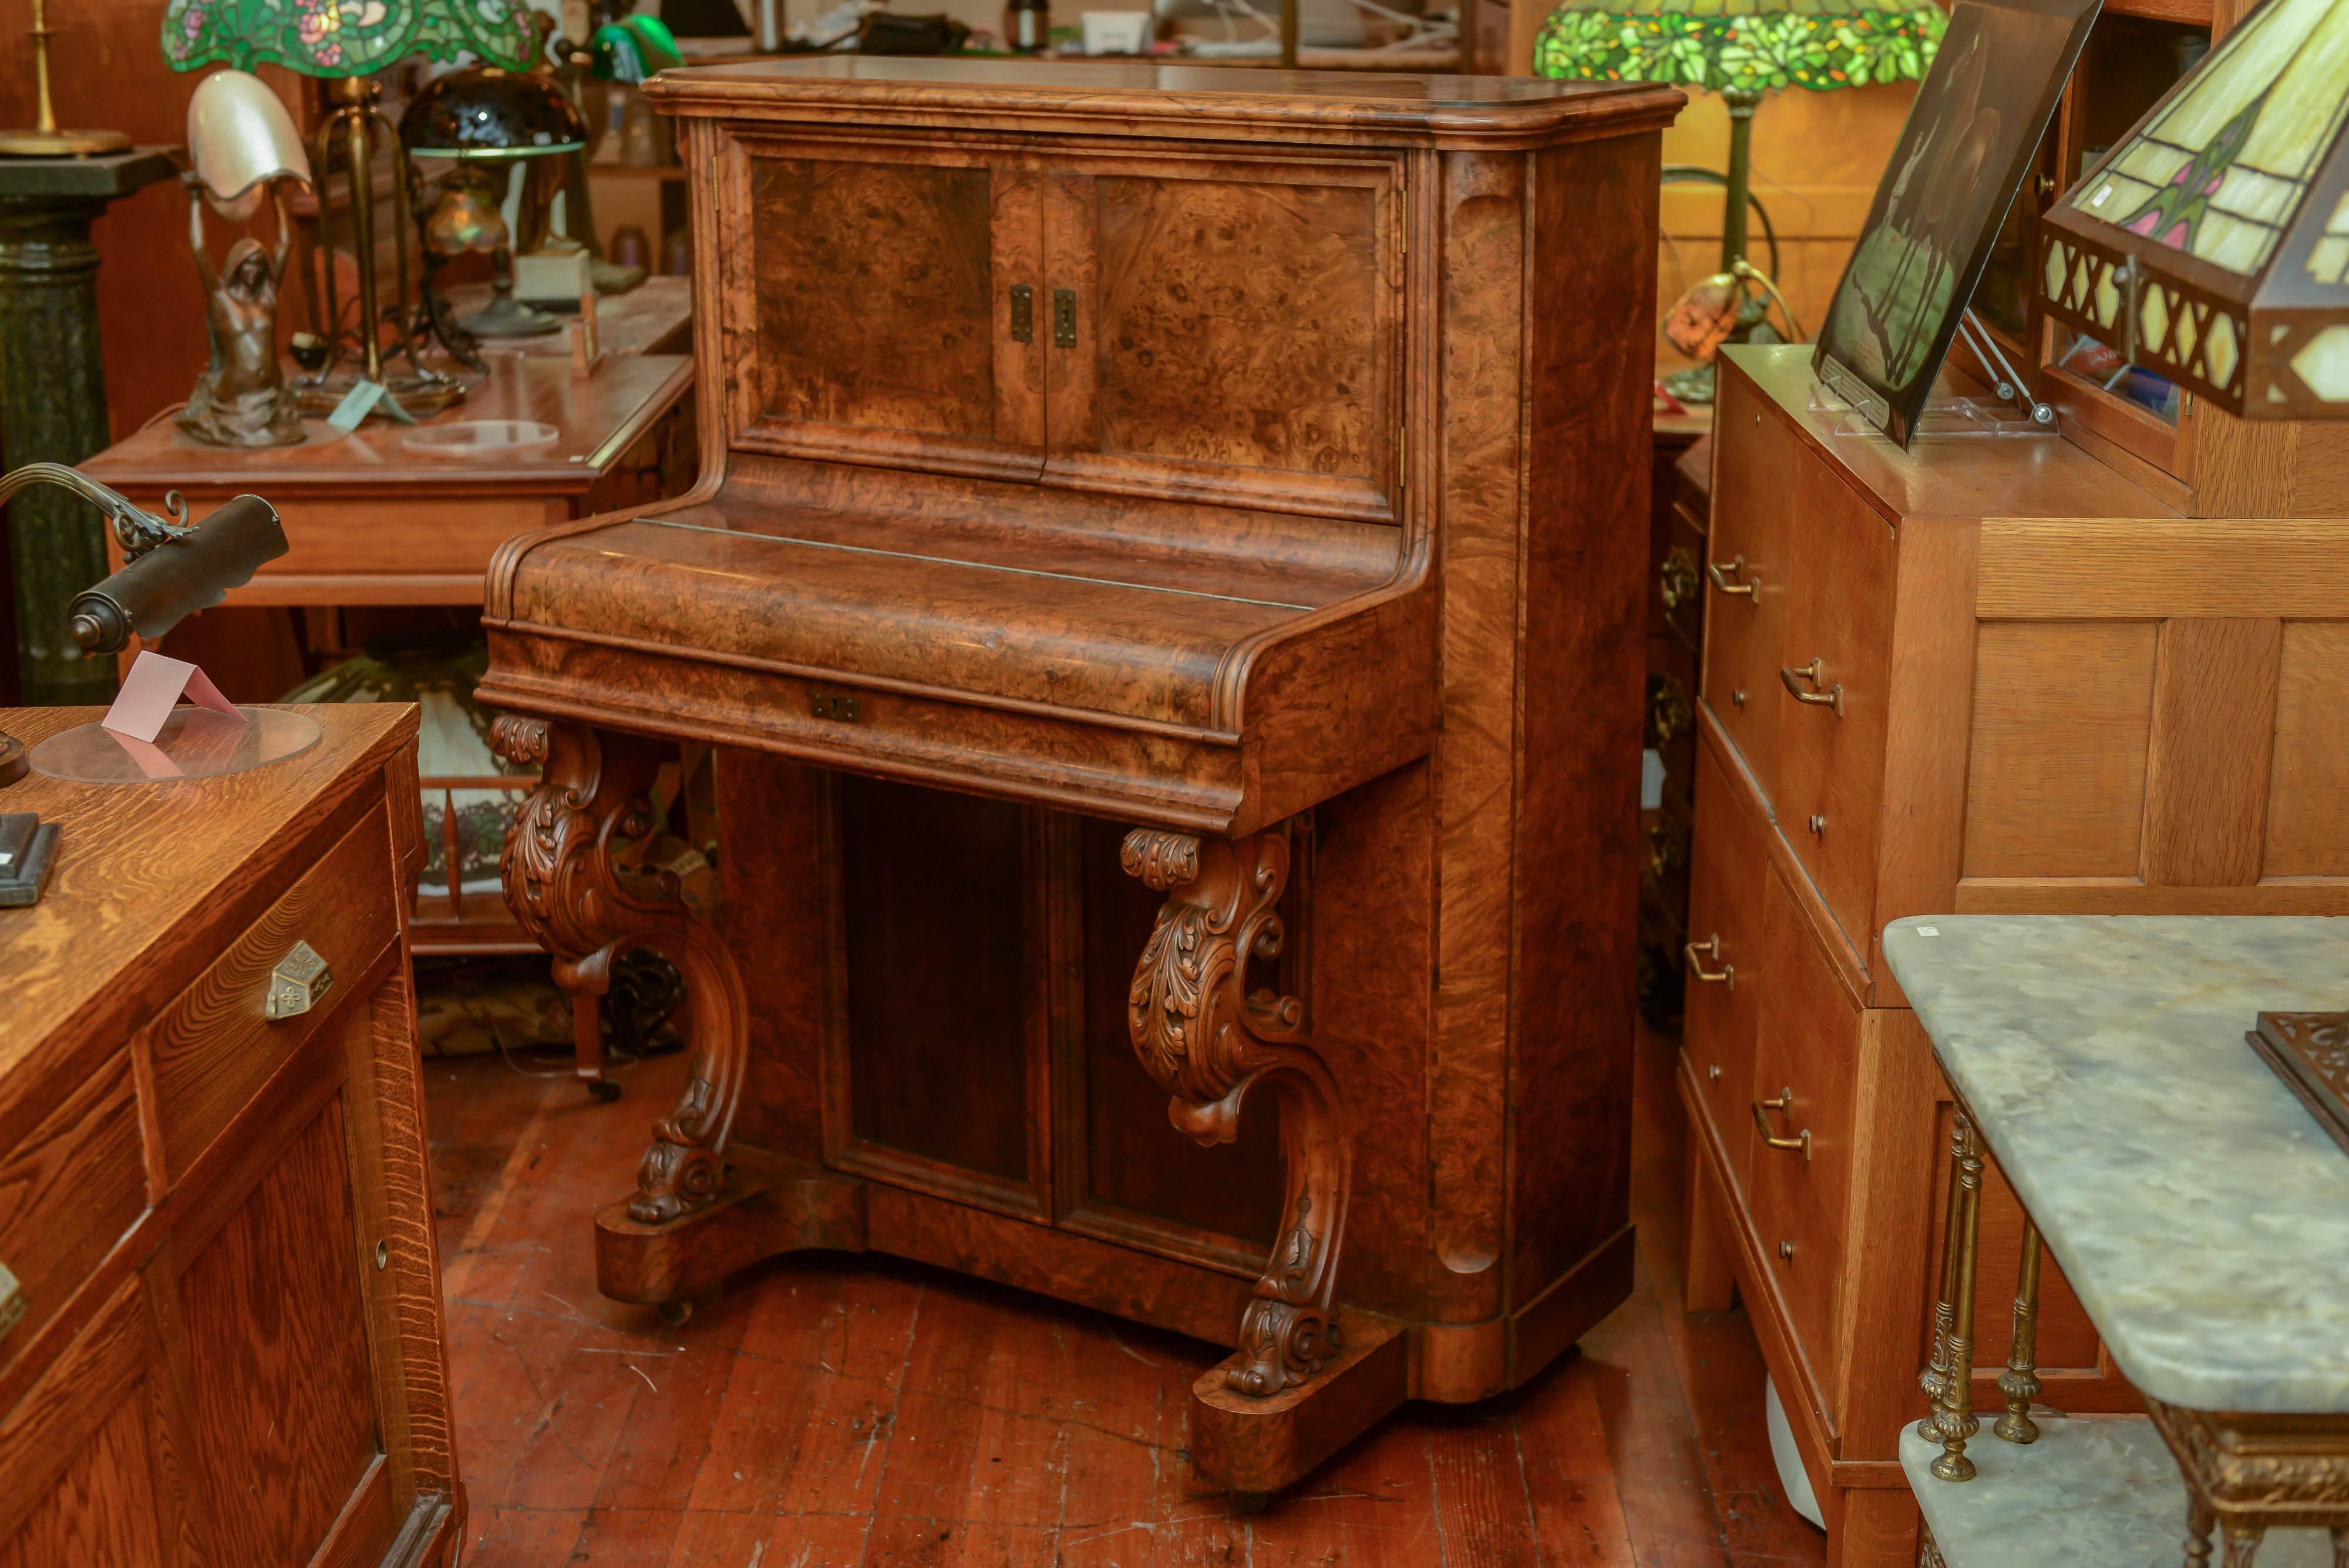 Yes, that's correct, this is a desk that closely resemble a spinet piano, however this was always a desk. The burl walnut wood just could not be any more rich and beautiful. The finish to the wood is like glass. The condition is that good. As you